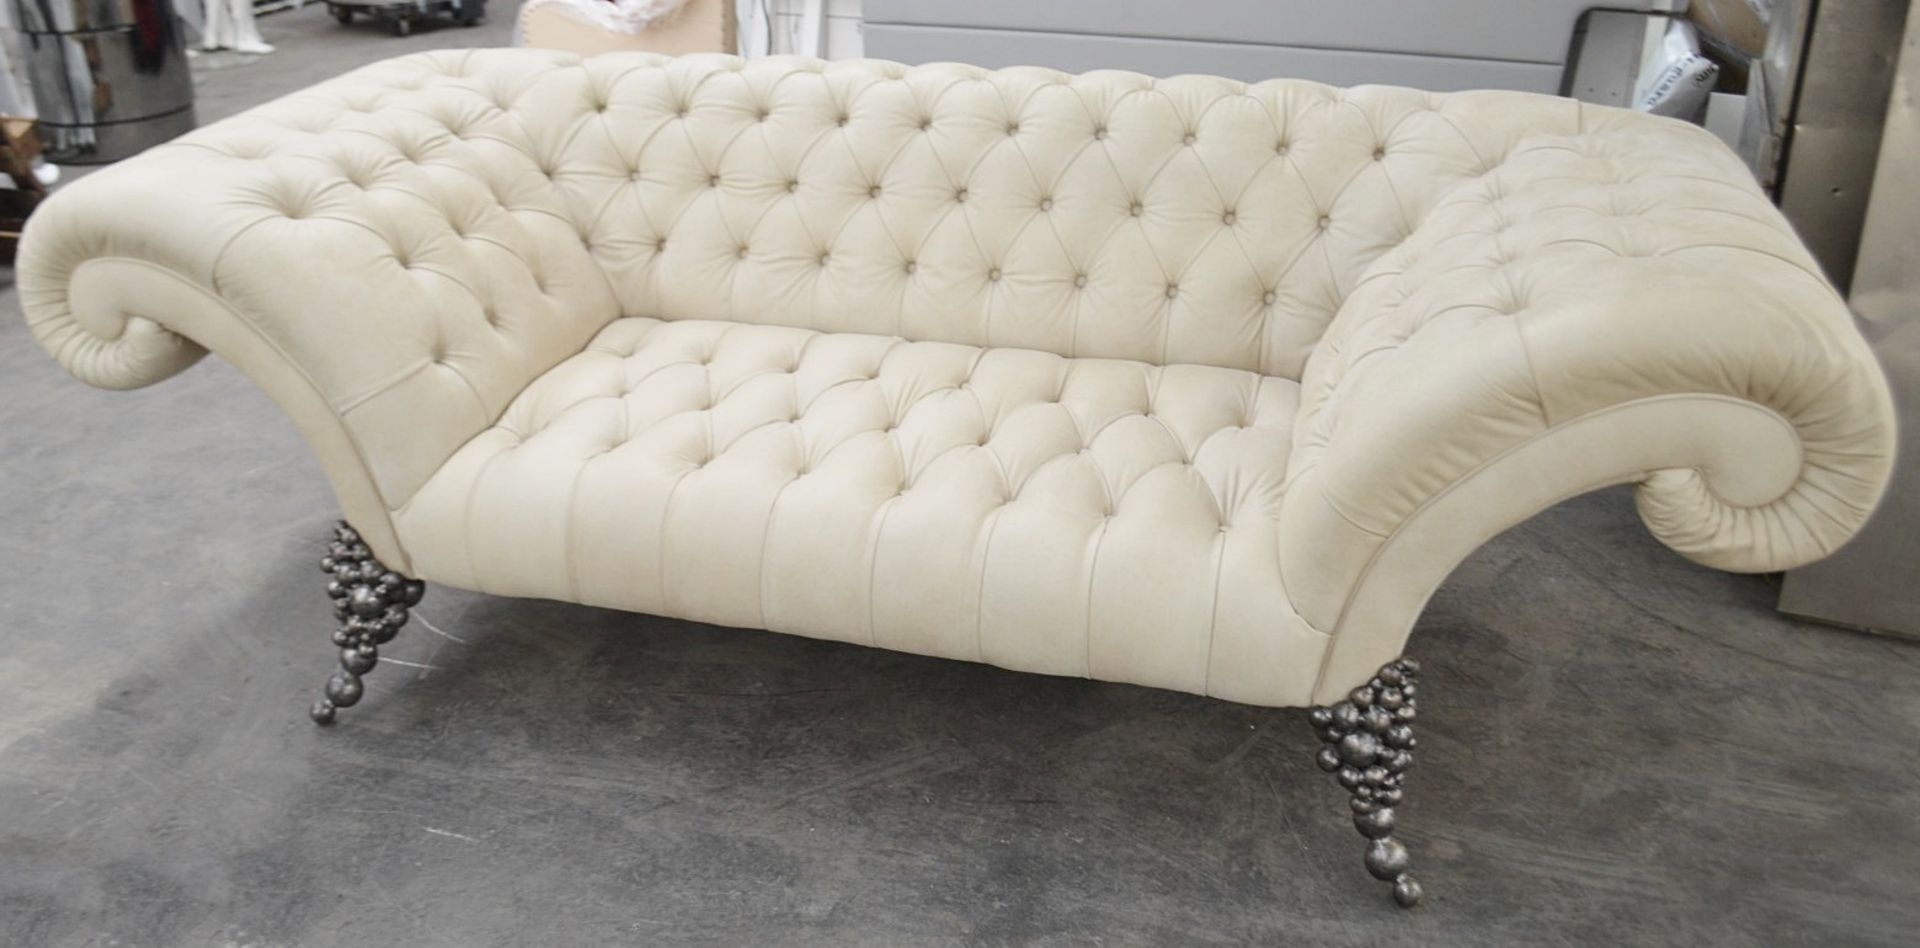 1 x Stunning Bespoke Cream Button-Back Leather Sofa - Professionally Handcrafted - Complete One-Off - Image 2 of 8